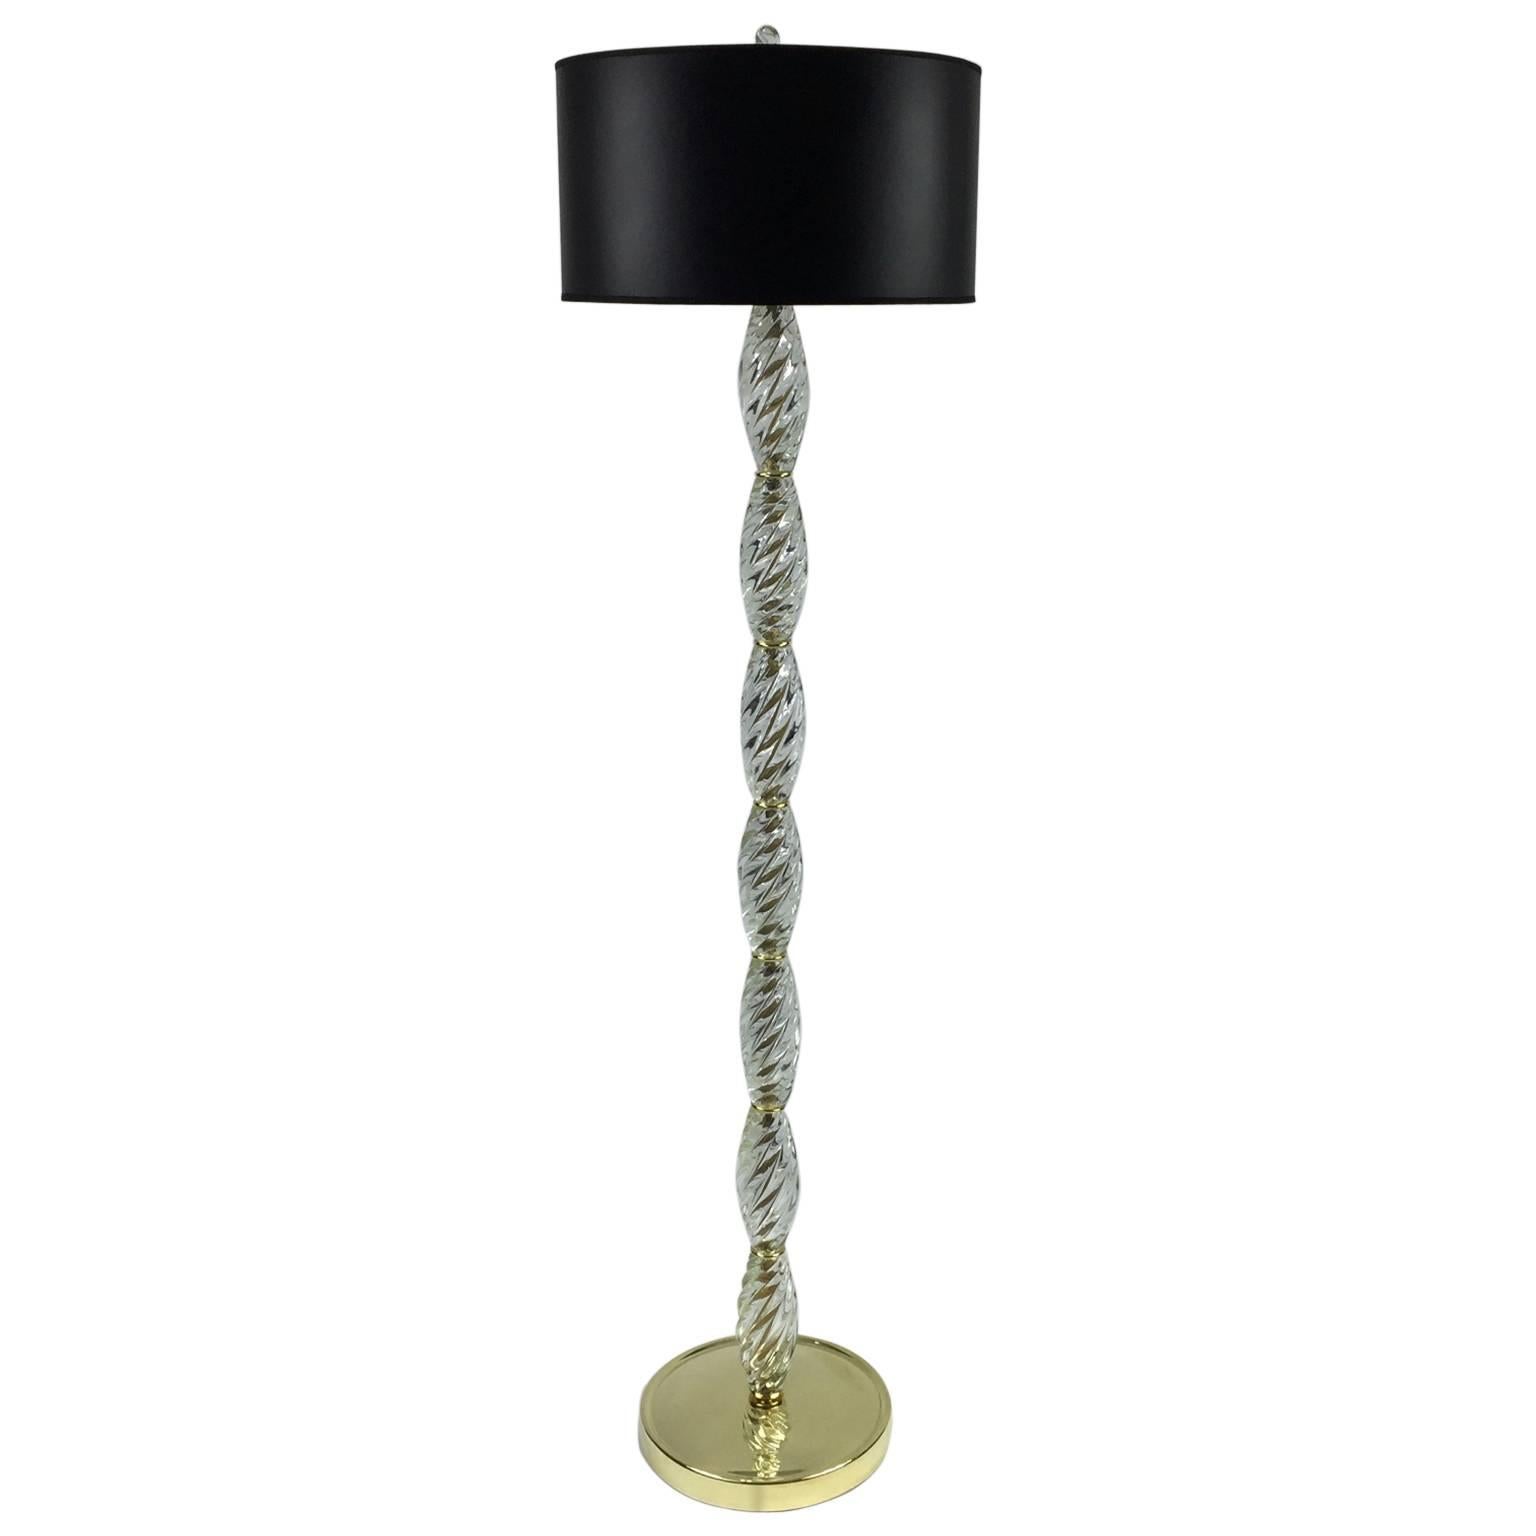 Murano Glass Baluster Floor Lamp with Brass Details in the Style of Venini